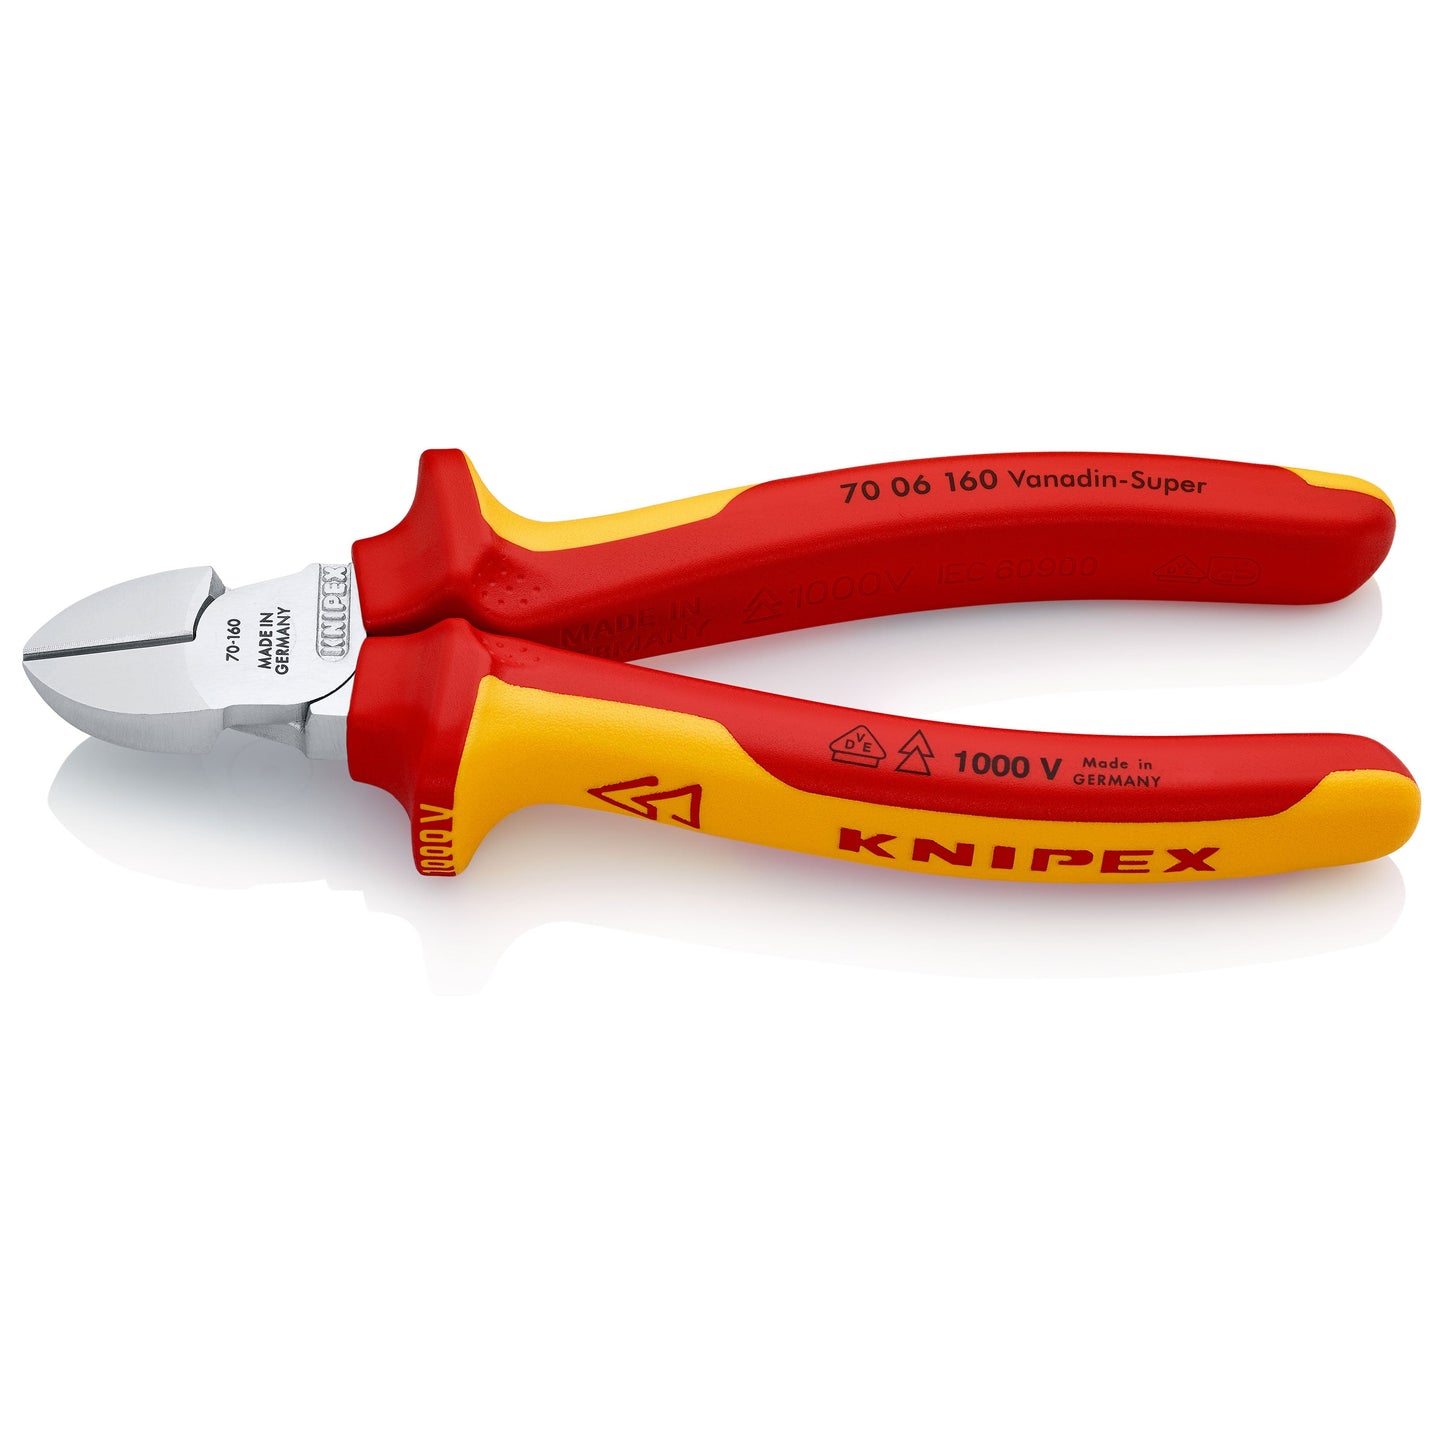 Knipex 70 06 160 - VDE insulated diagonal cutting pliers 160 mm with two-component handles